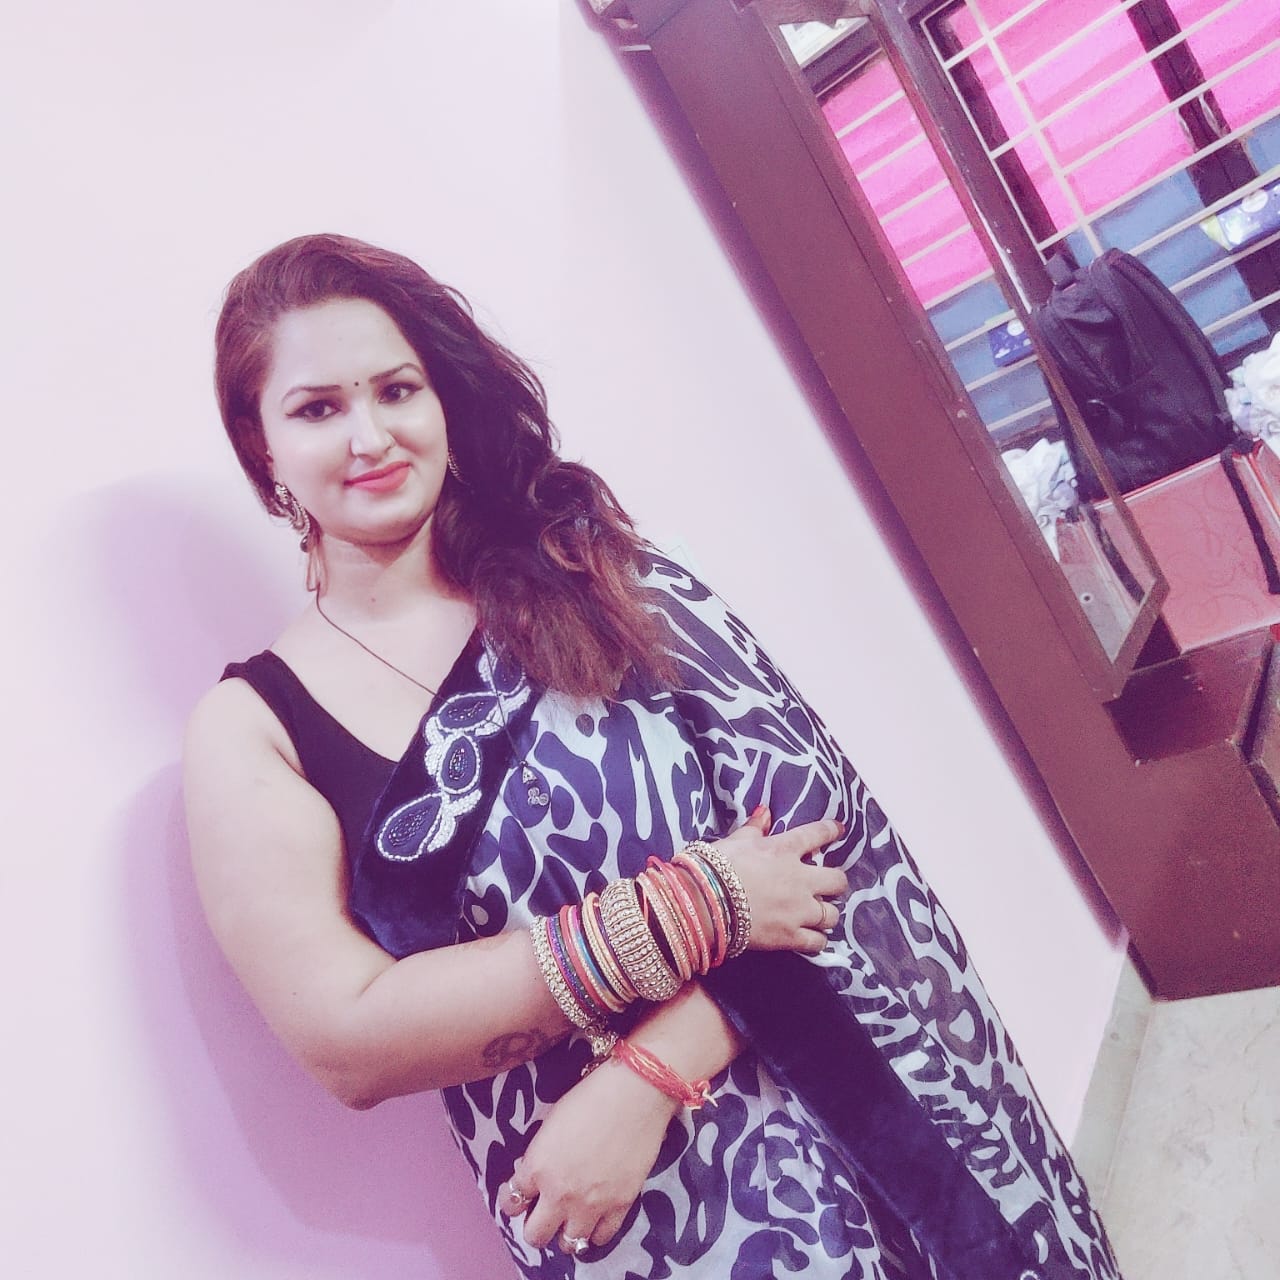 Call girl in Coimbatore South 